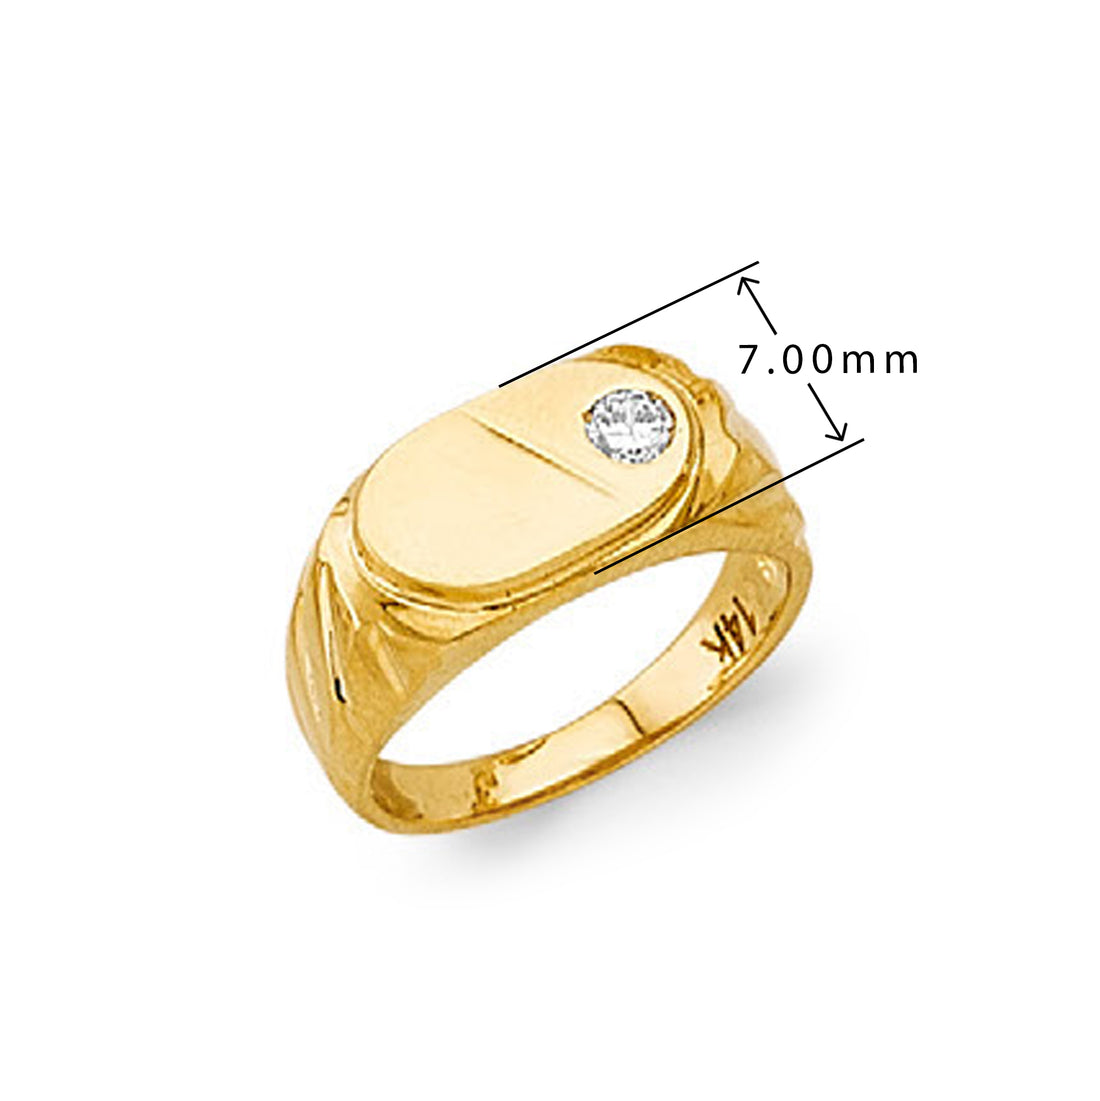 CZ Gorgeous Single stone Signet Ring in Solid Gold with Measurement